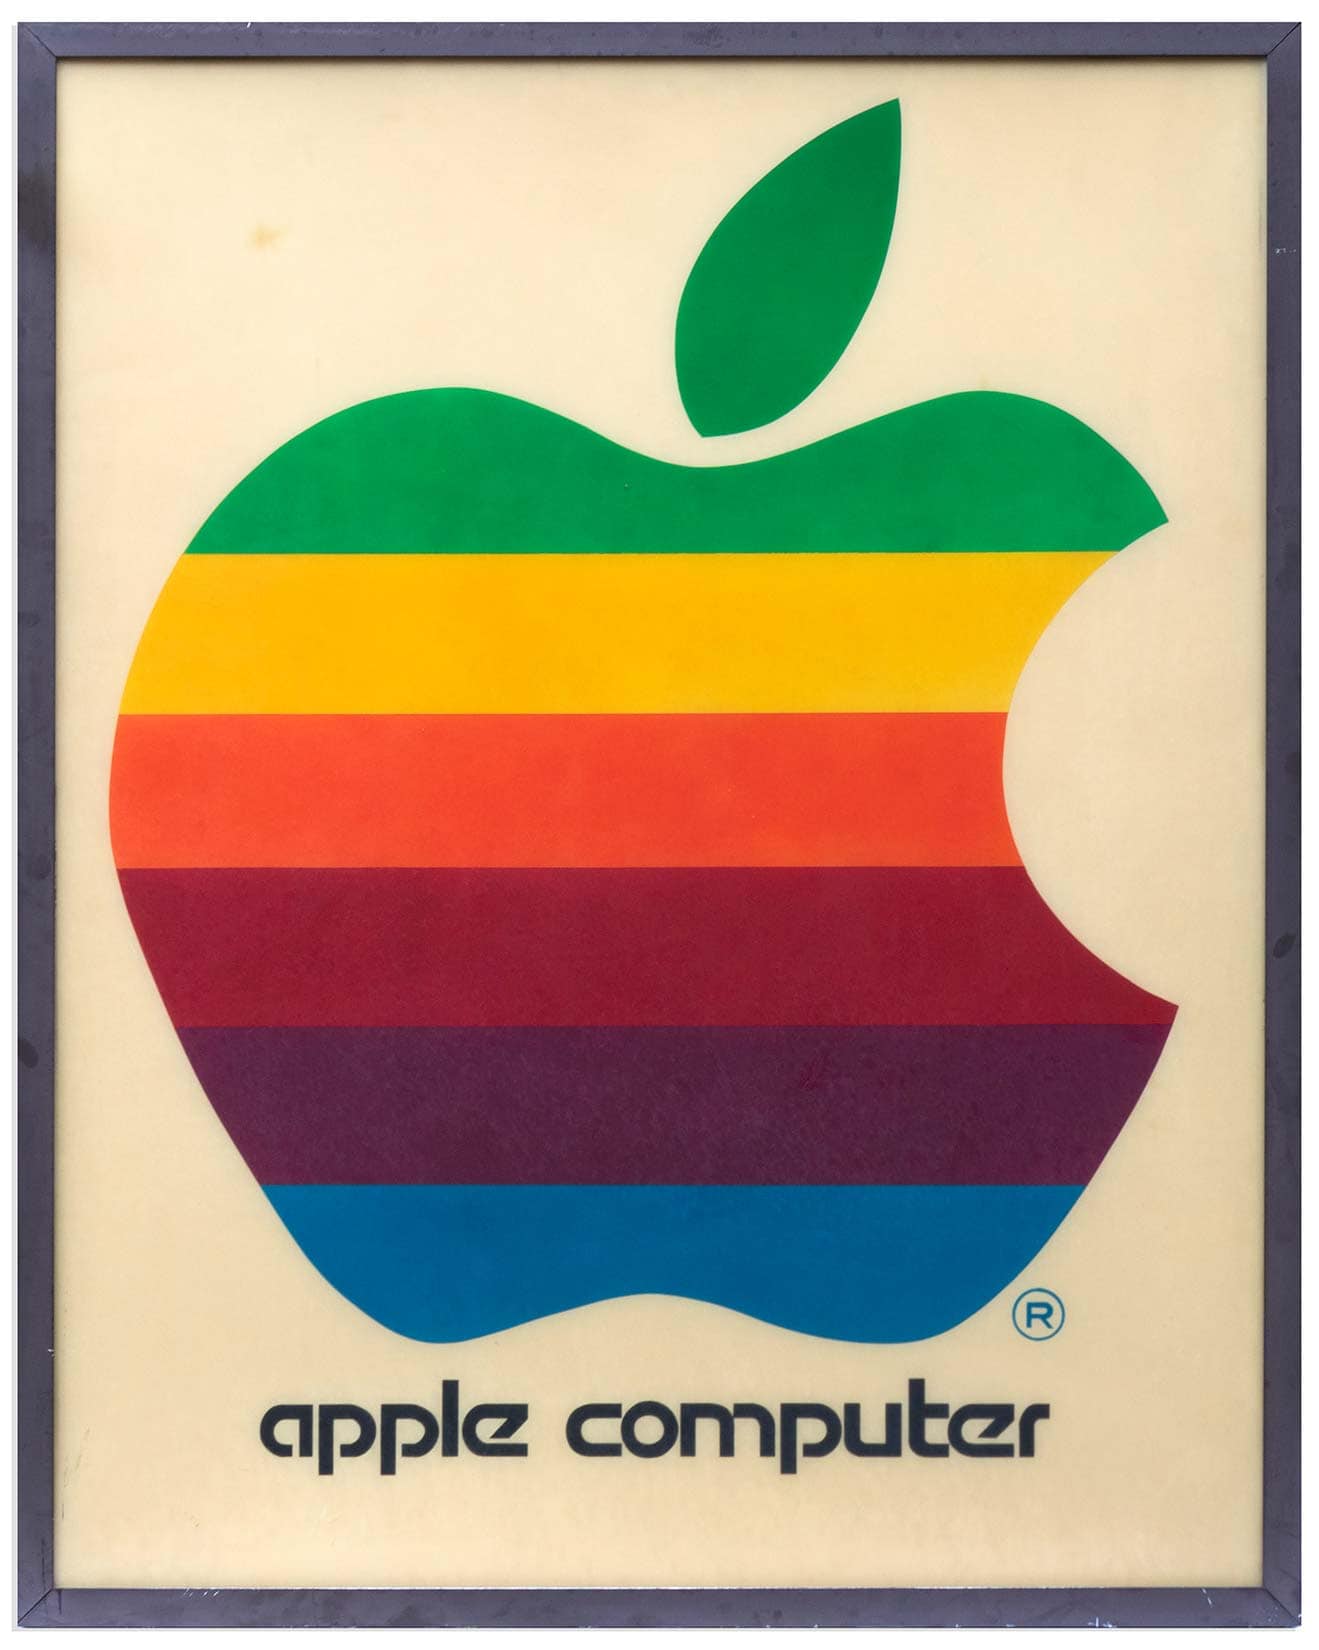 Apple’s retail poster from 1978 goes to auction with a minimum bid of R $ 100,000